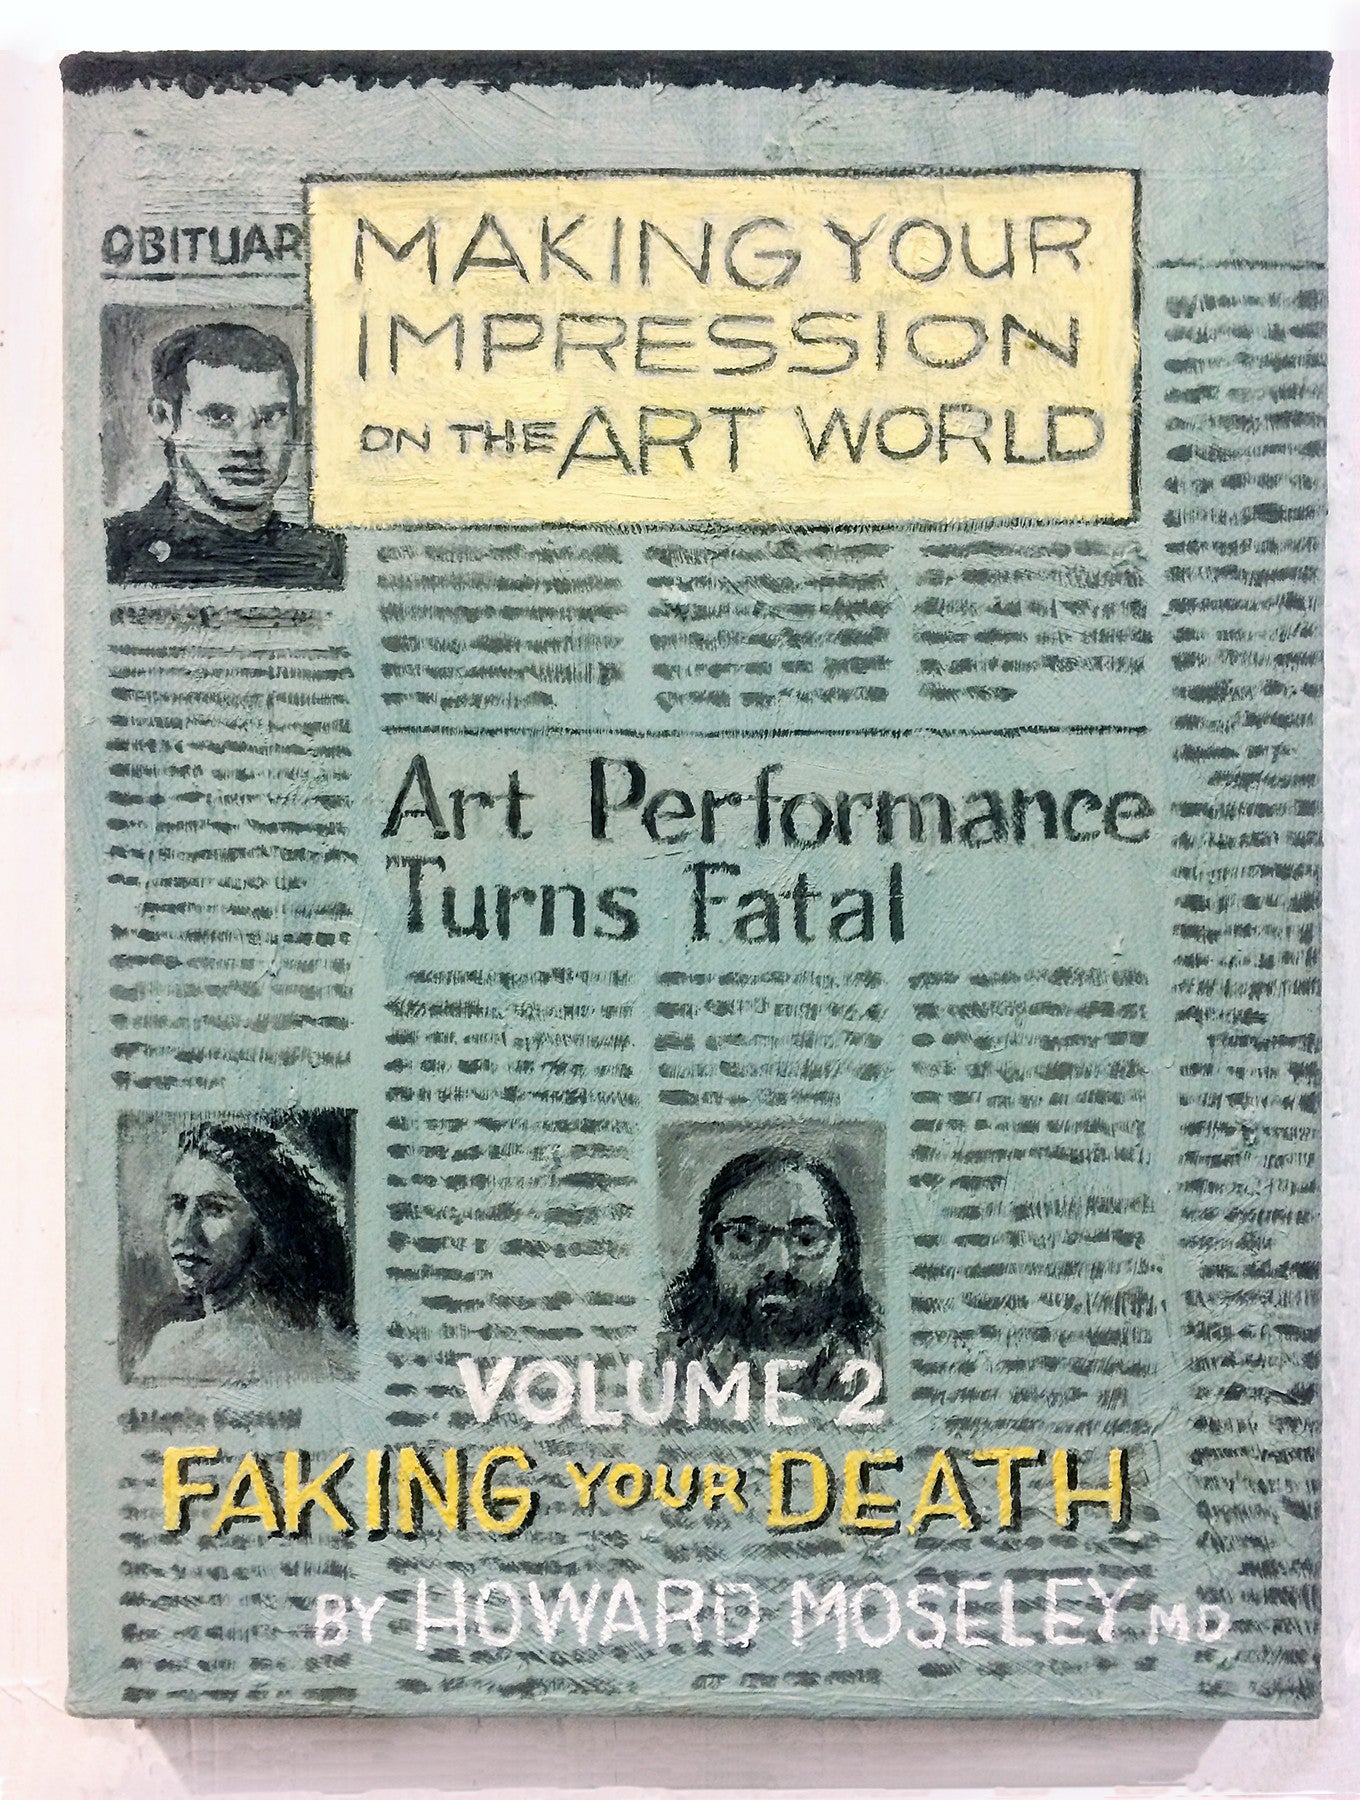 Paul Gagner, "Faking Your Death"